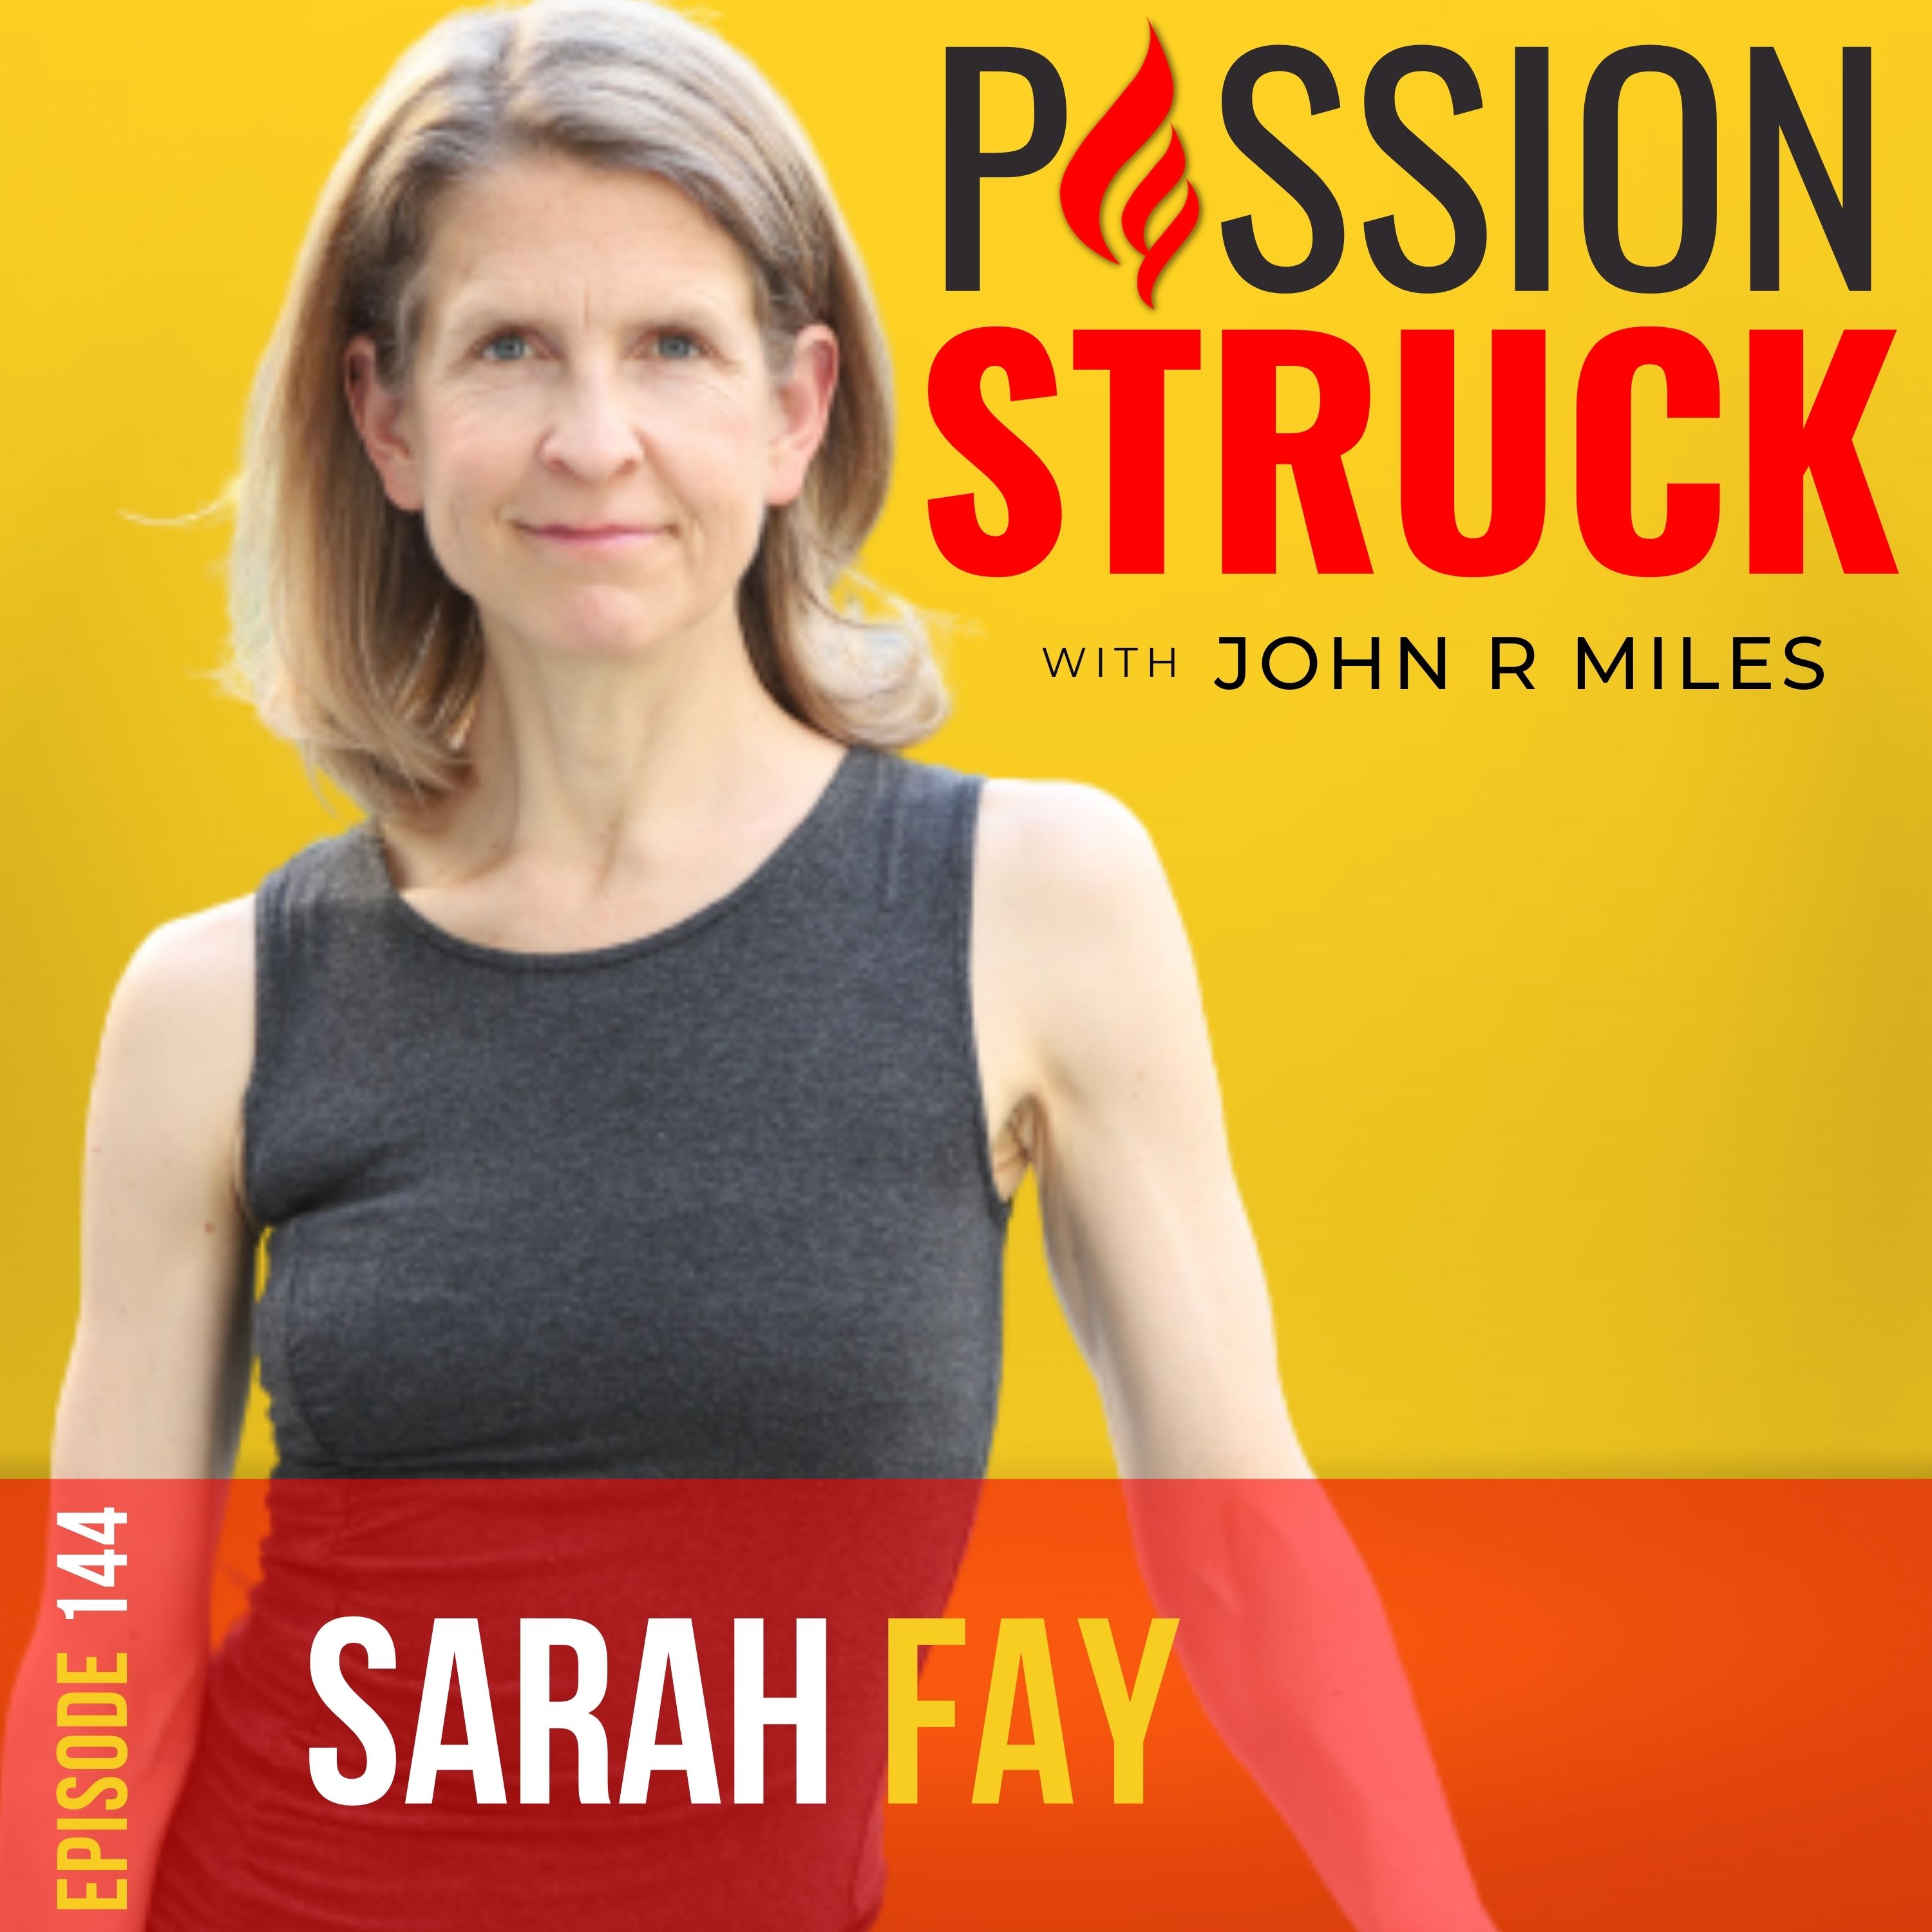 Passion Struck Podcast album cover for episode 144 with Sarah Fay